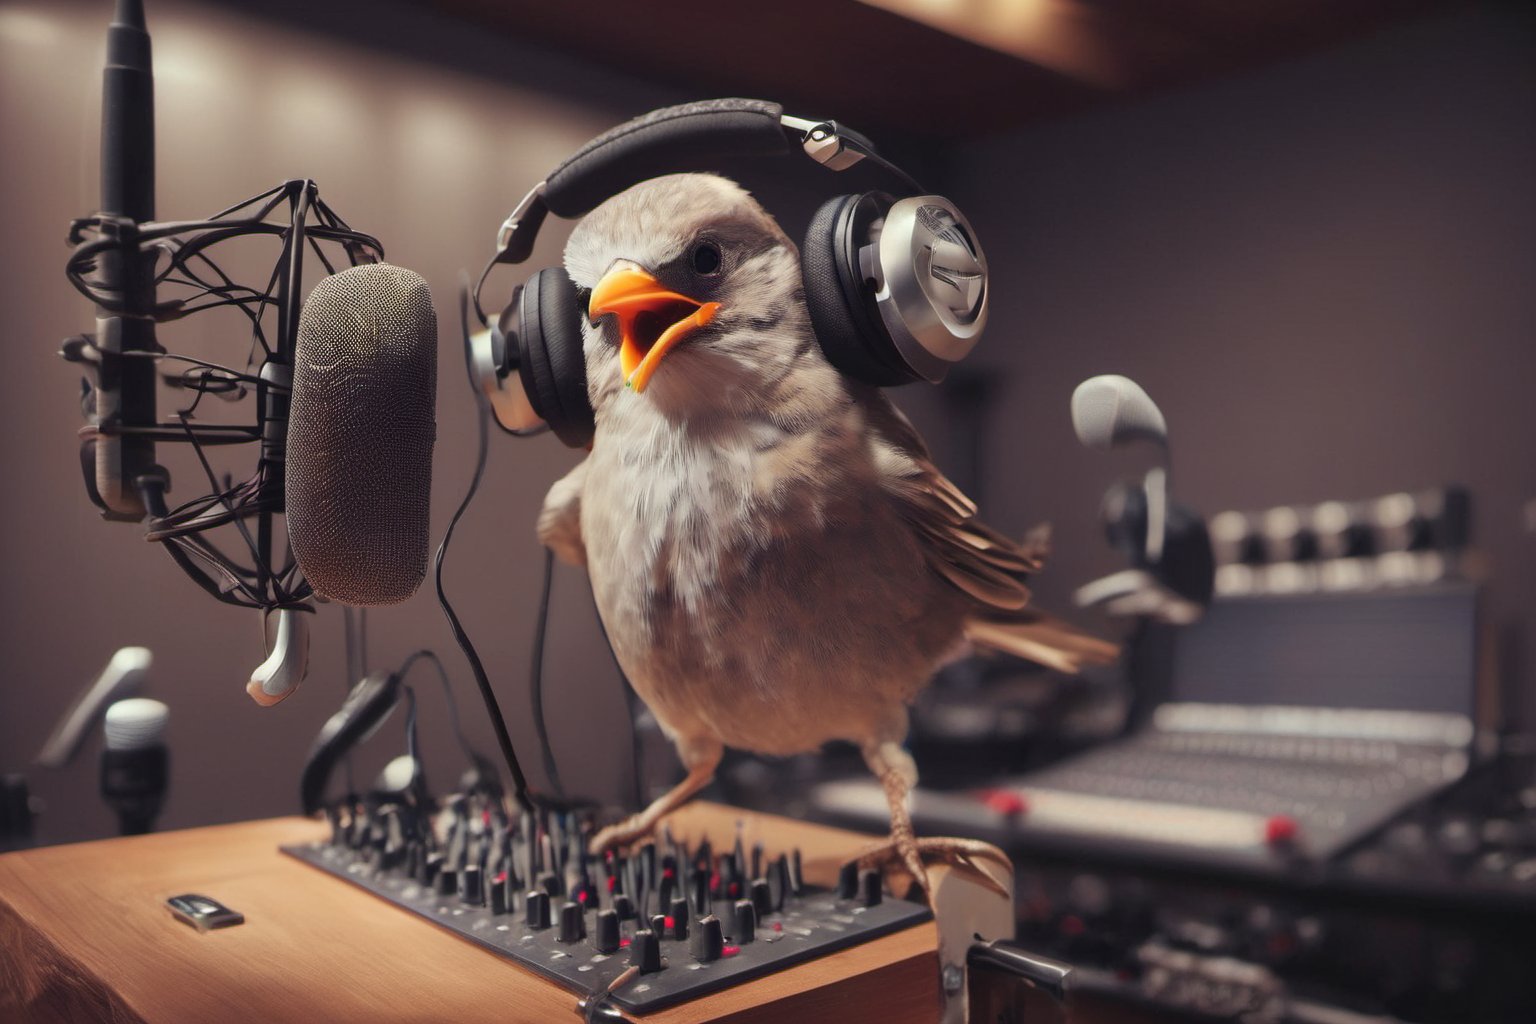 "A photograph of a bird wearing headphones and speaking into a high-end microphone in a recording studio.